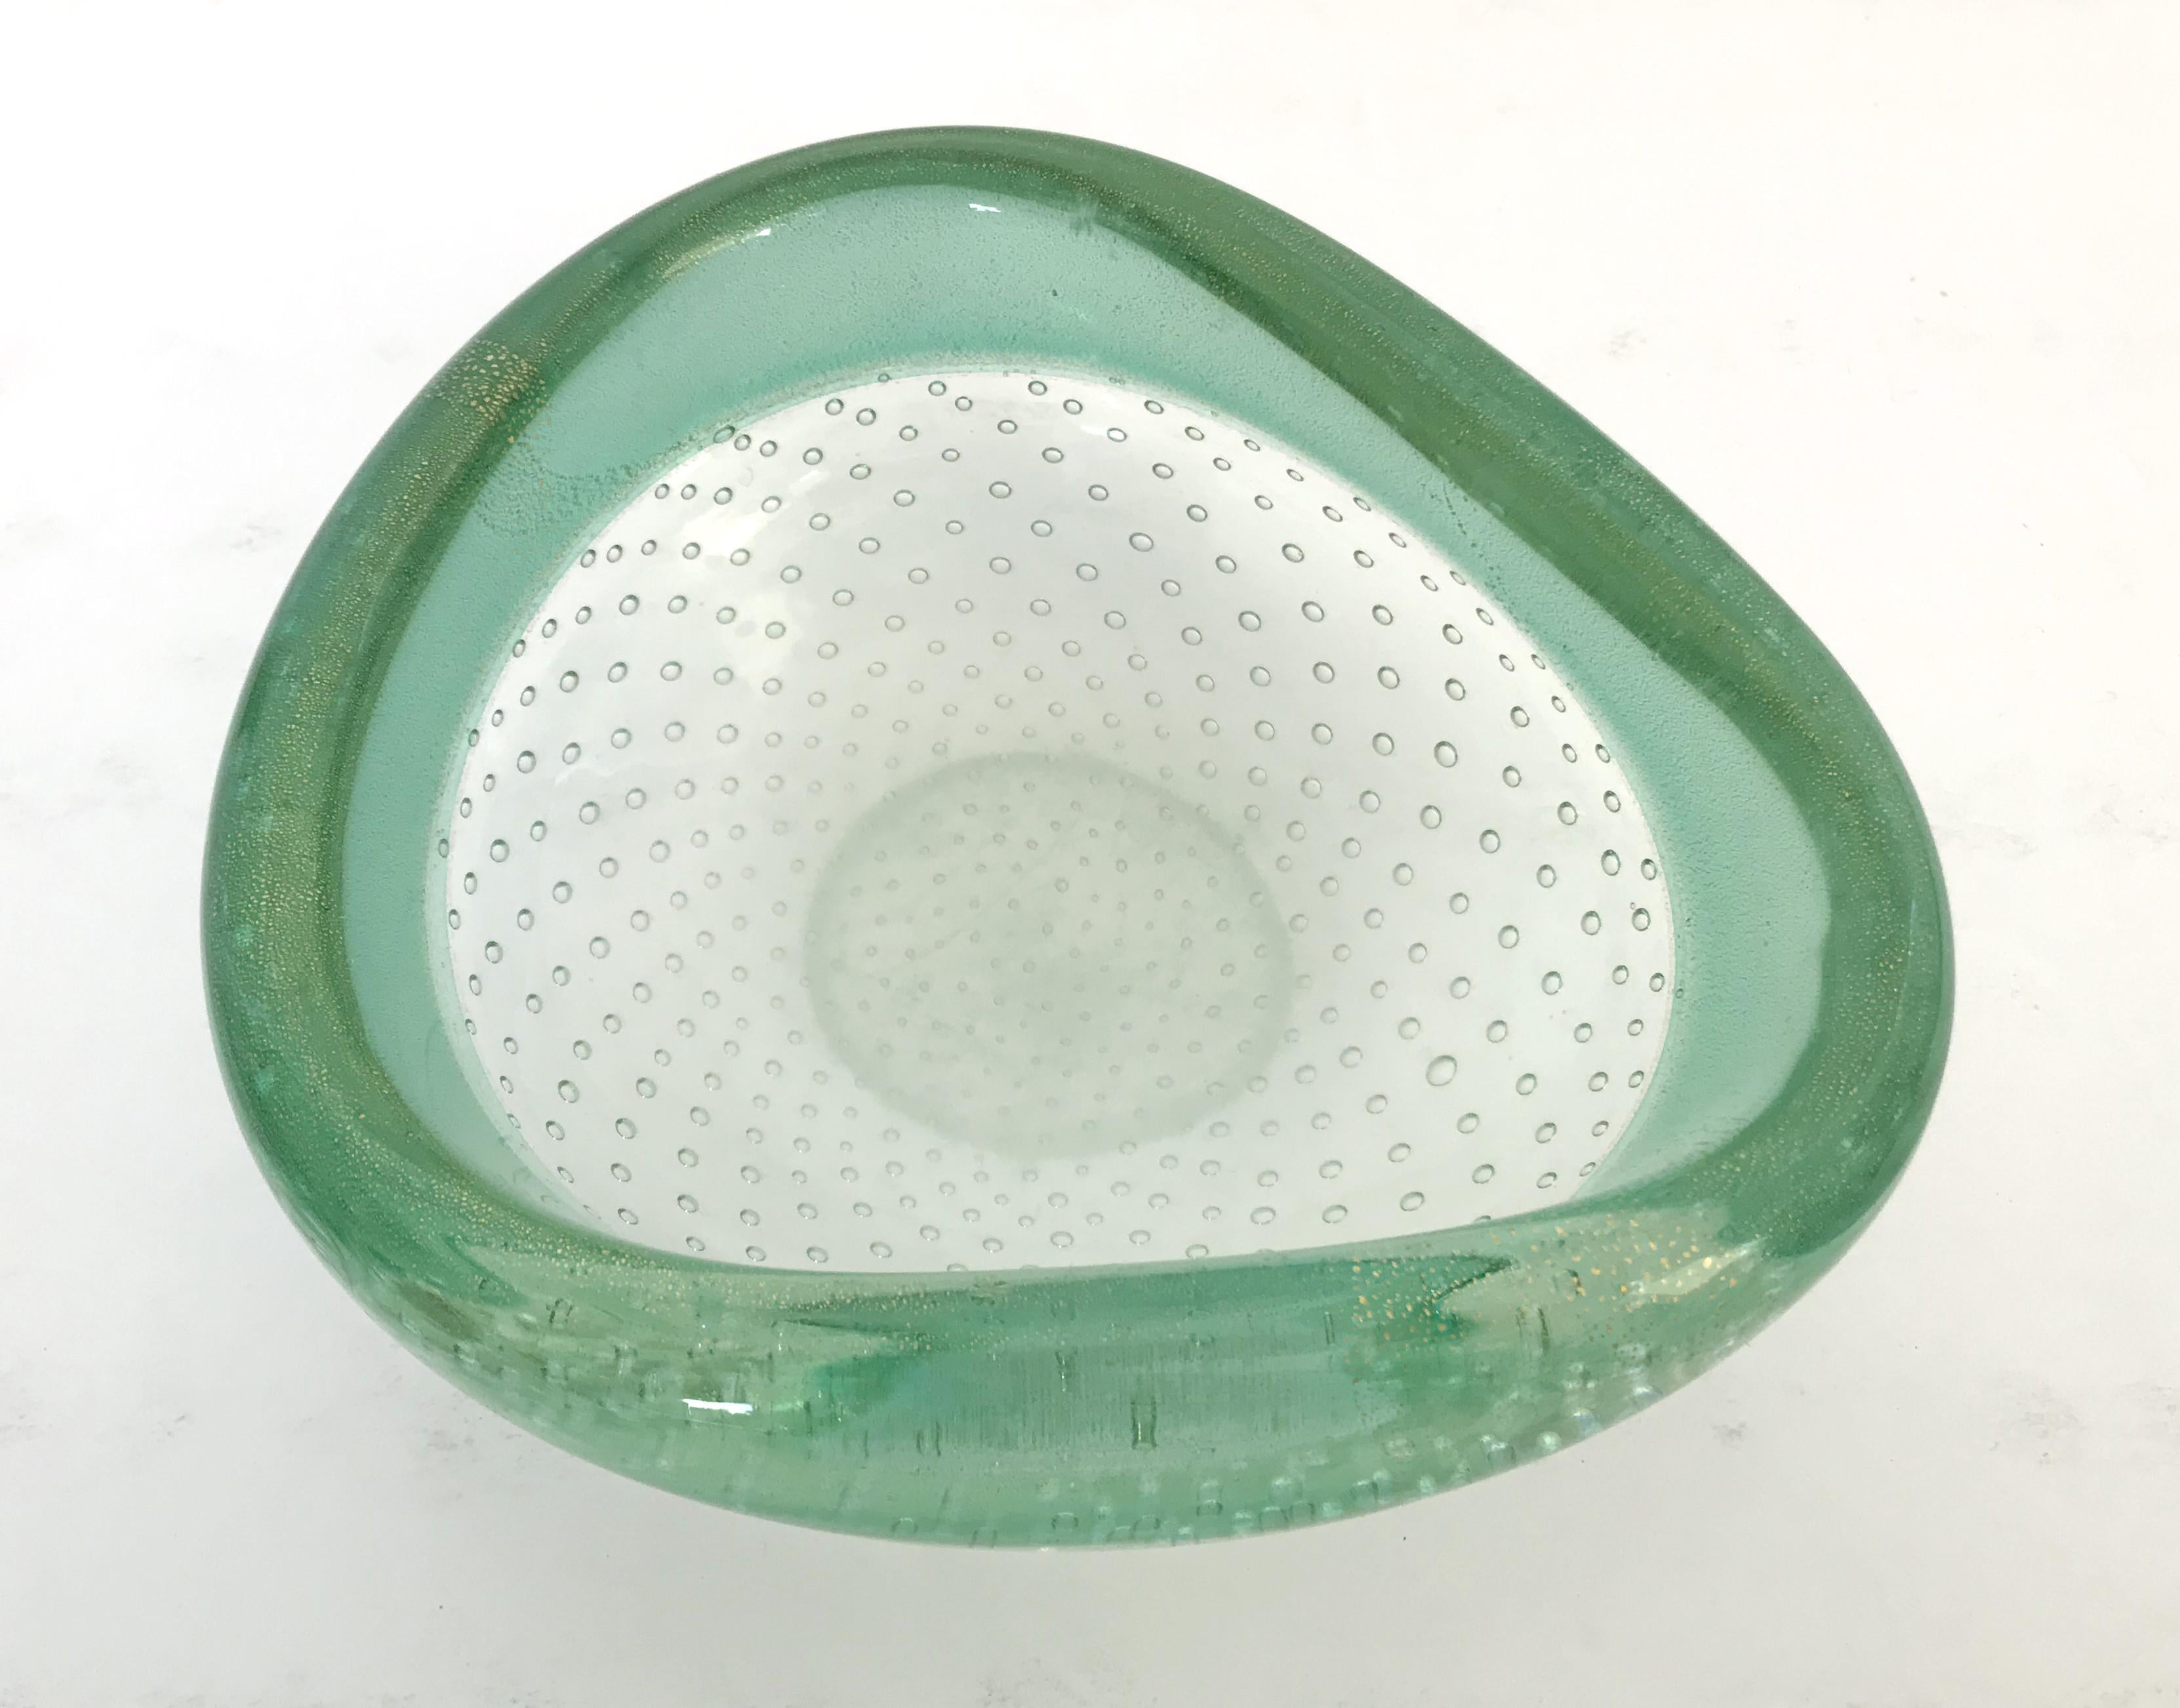 Vintage Italian clear and green Murano glass bowl infused with gold flecks, carefully hand blown with small bubbles inside the glass using pulegoso technique / Made in Italy, circa 1960s
Measures: width 6.5 inches, depth 6 inches, height 2.5